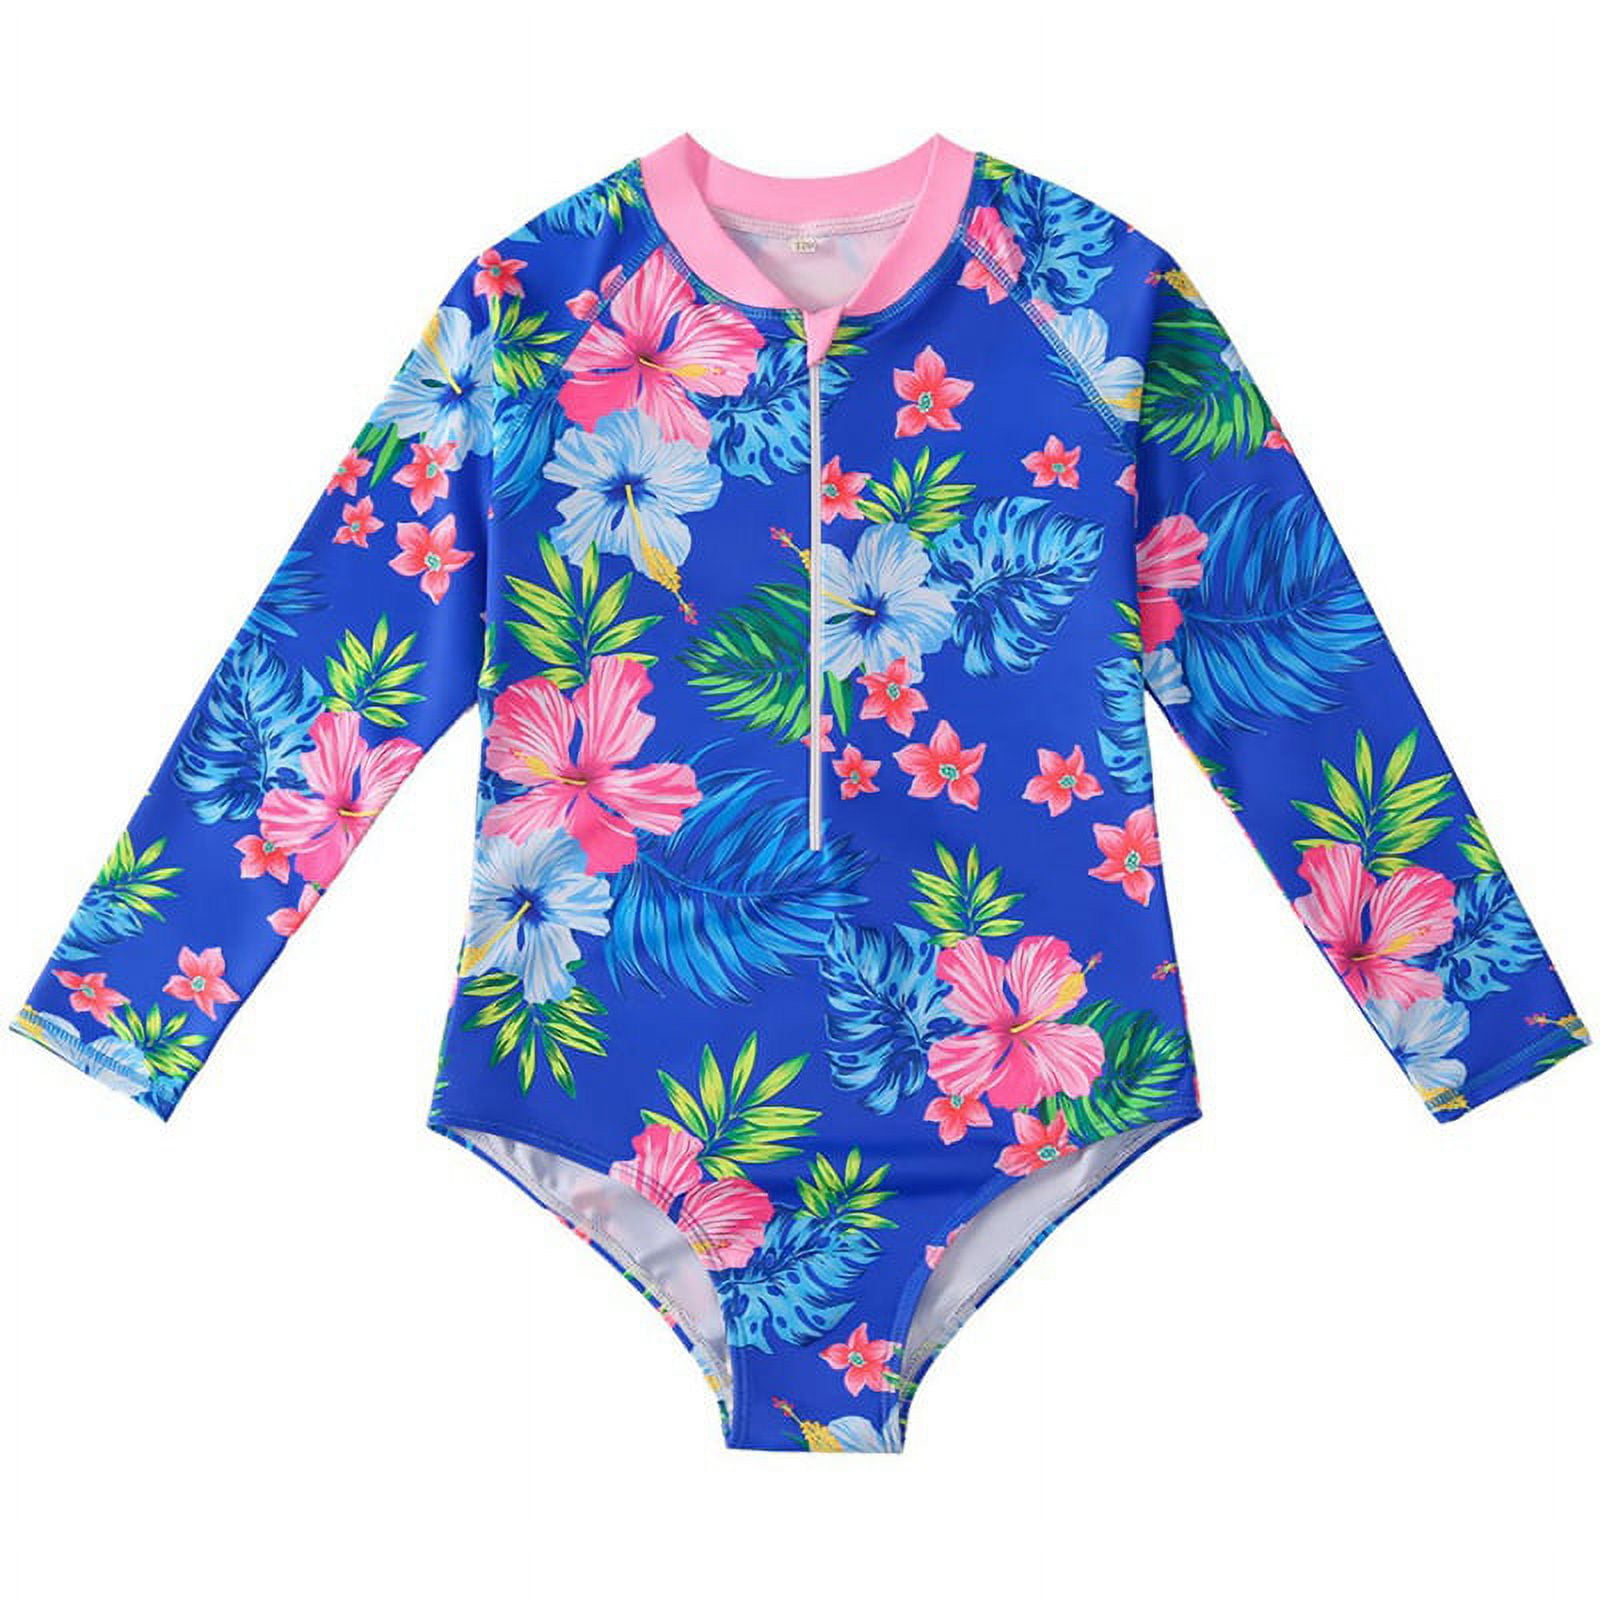 Girls' Bathing Suit - UPF 50+ One Piece Swimsuits Toddlers Long Sleeve ...